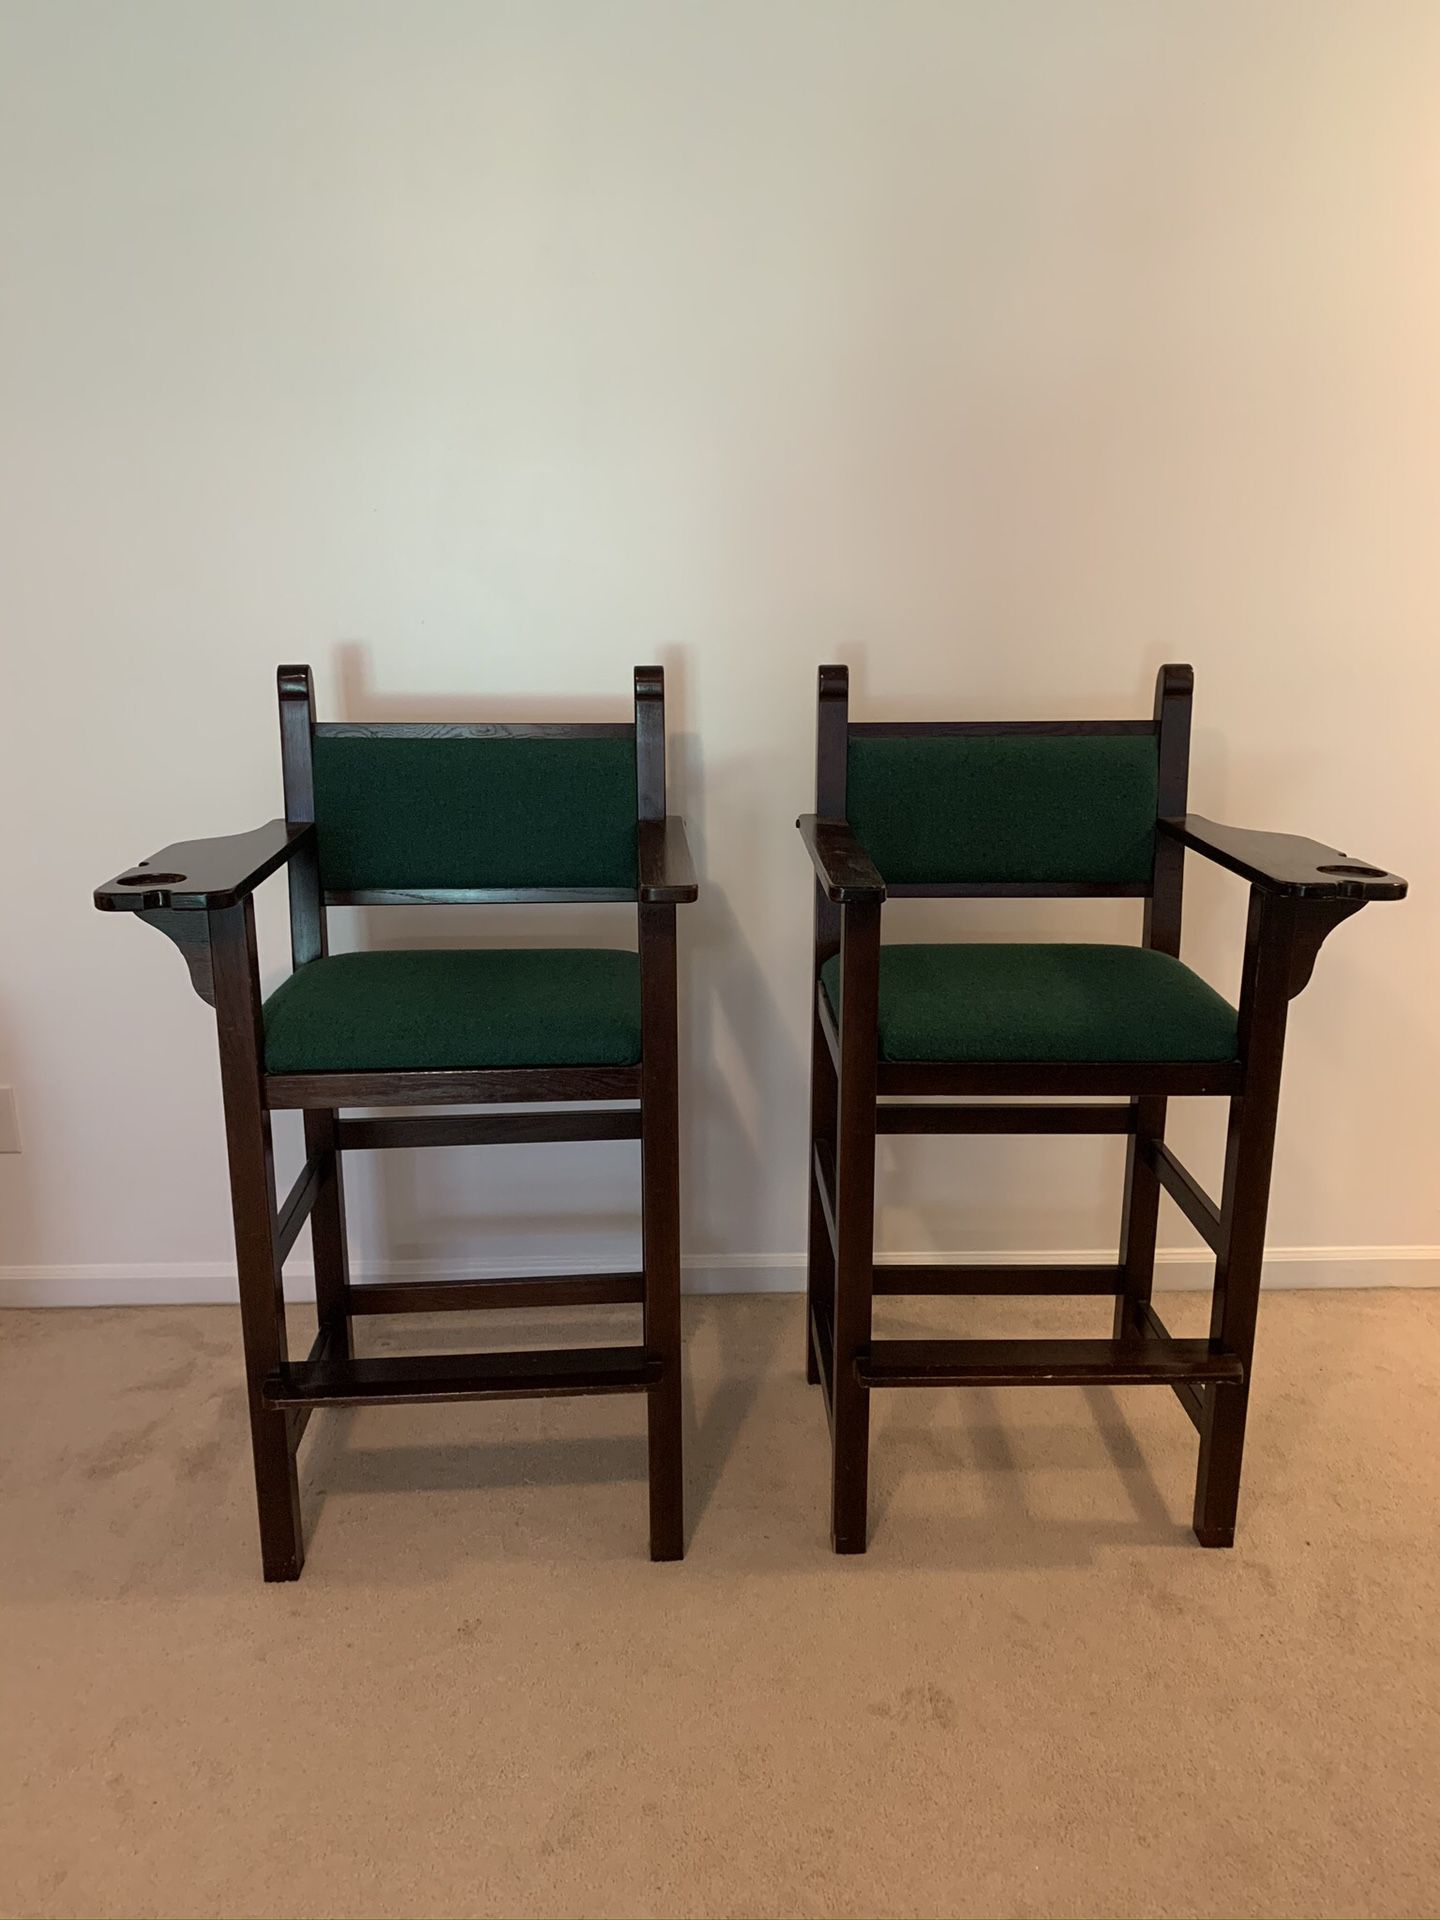 $100 for both!!! Billiard Spectating Chairs for OBO!!! Pool/Pub Chairs